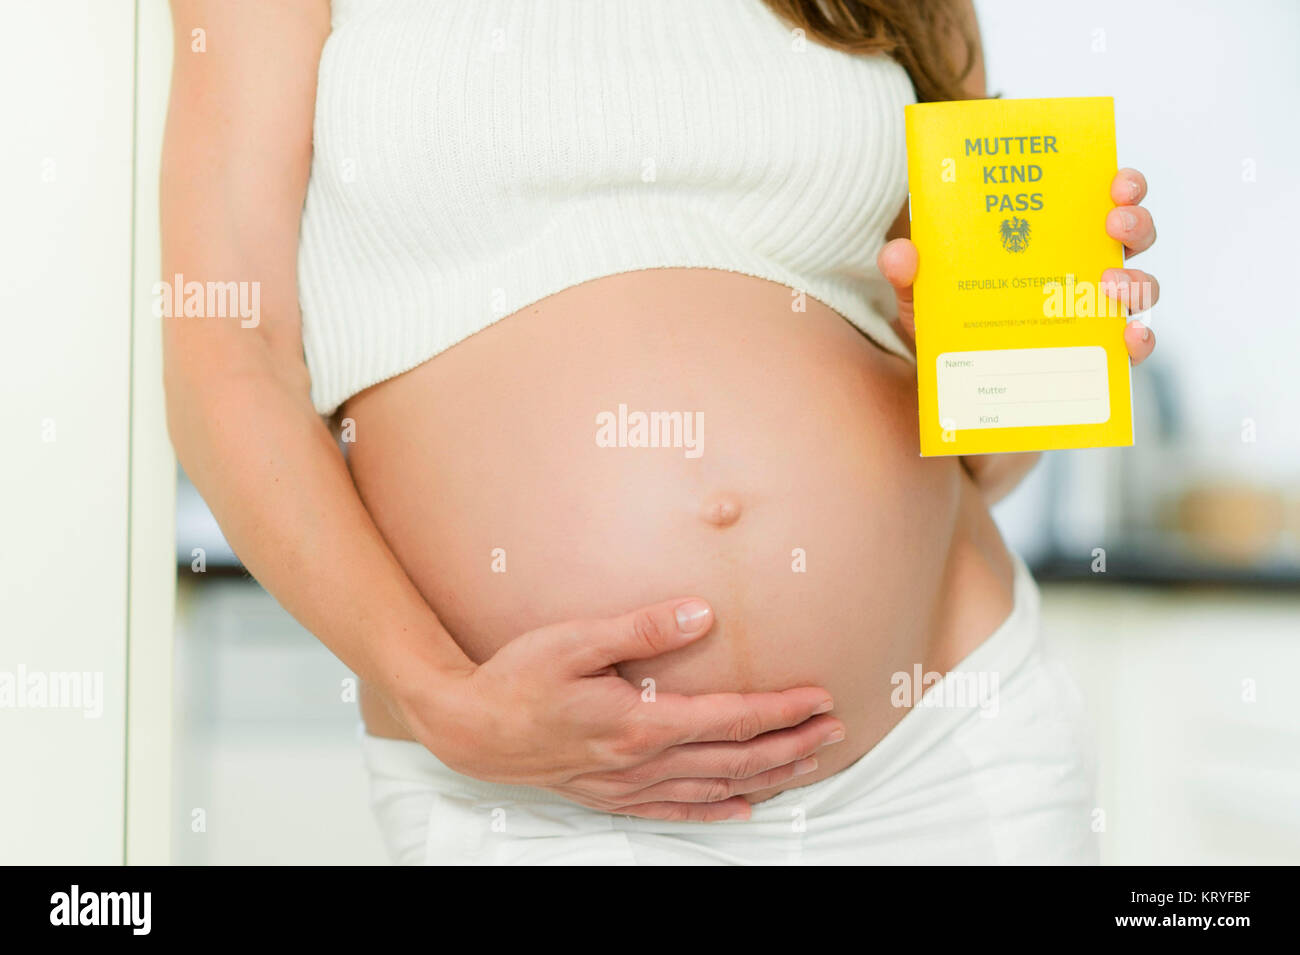 Schwangere Frau mit Mutter-Kind-Pass - pregnant woman with Mother-Child-Pass, Austria Stock Photo